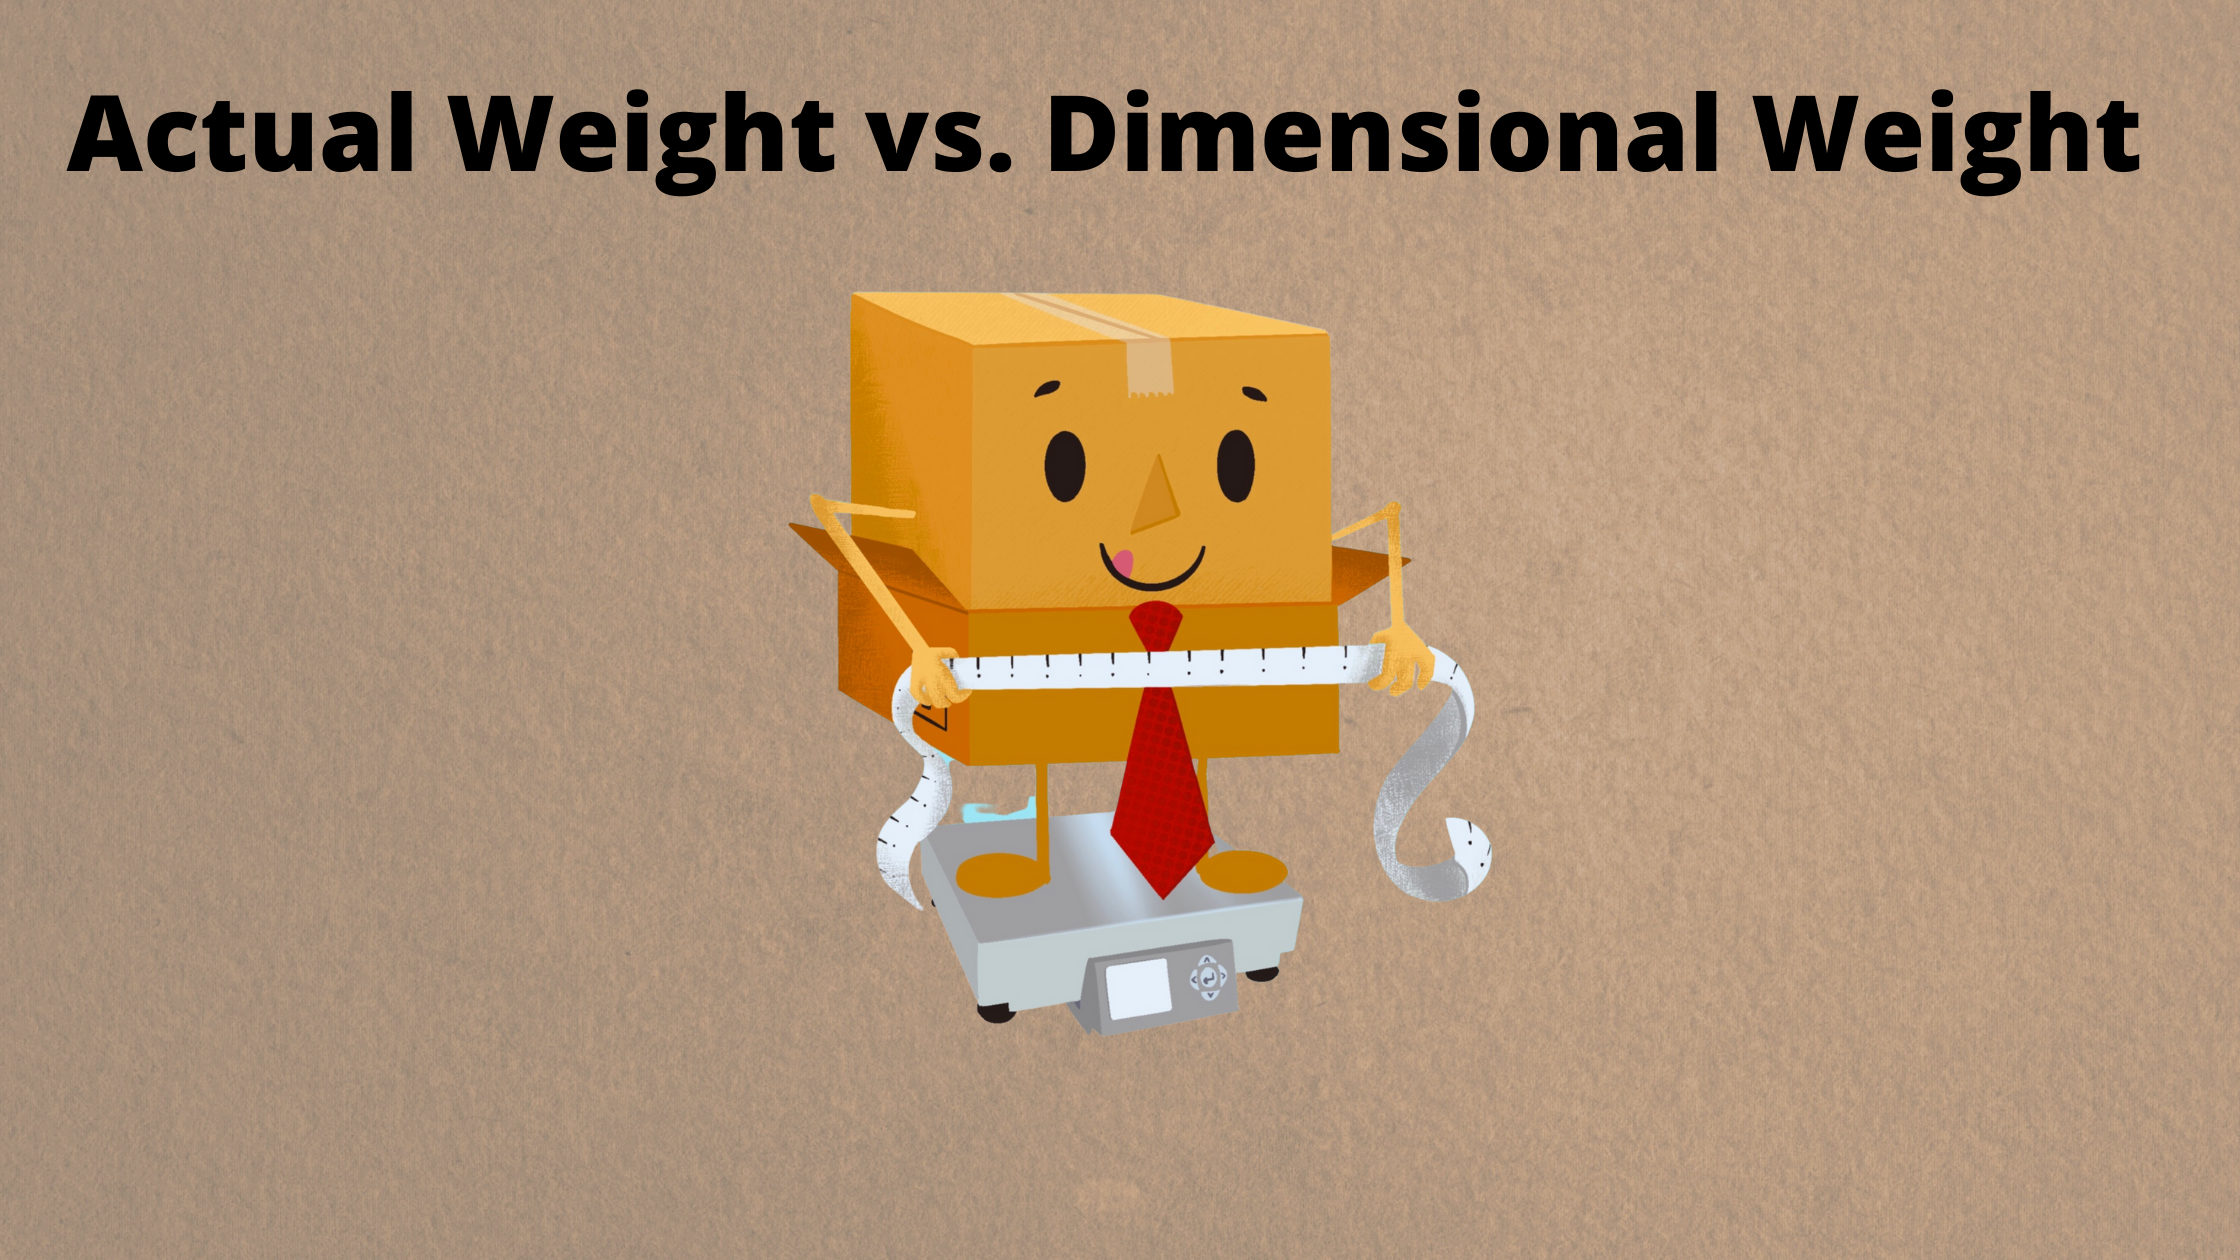 Actual Weight vs. Dimensional Weight